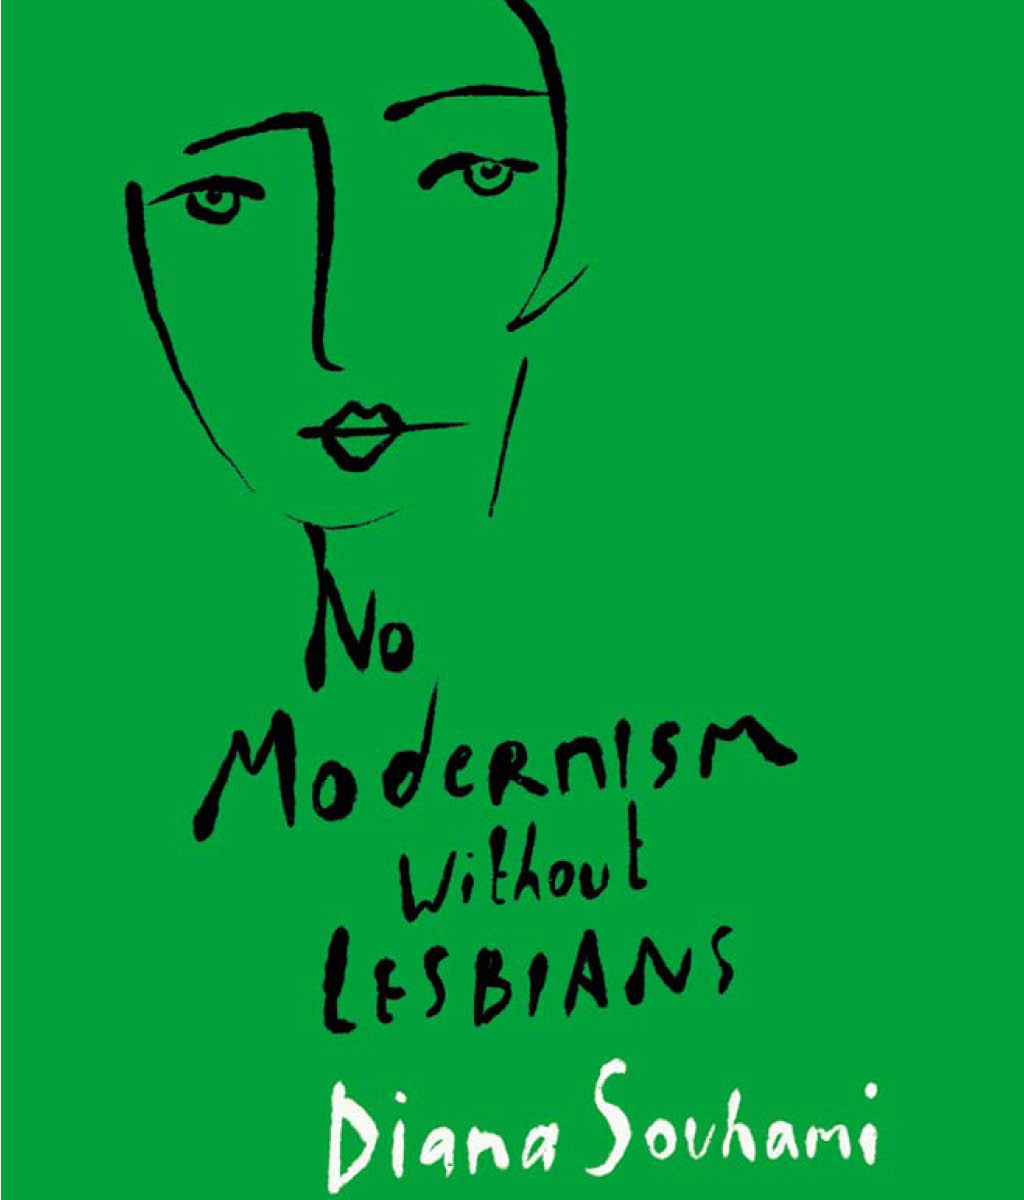 No Modernism Without Lesbians by Diana Souhami